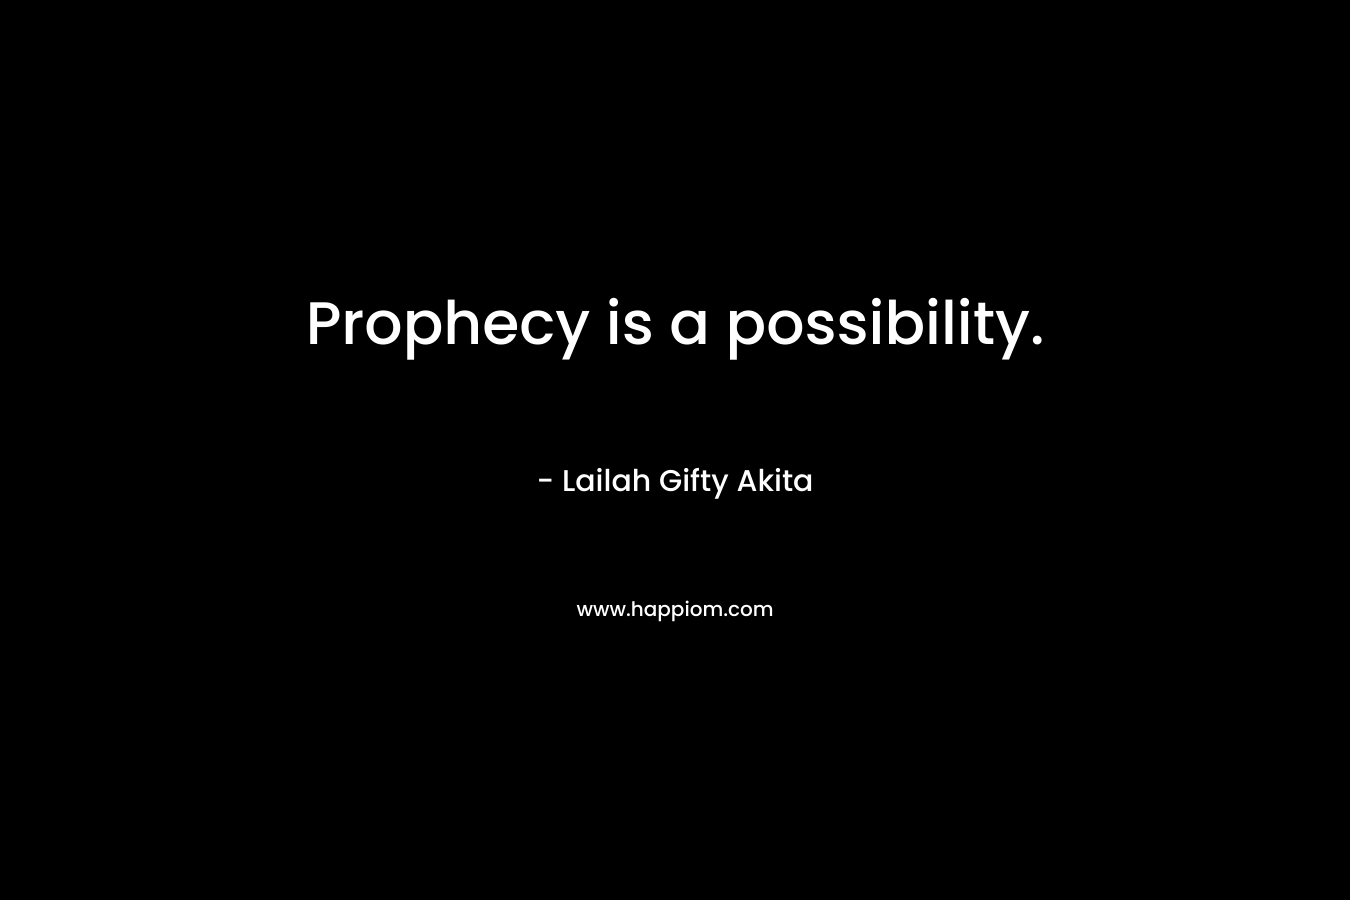 Prophecy is a possibility.